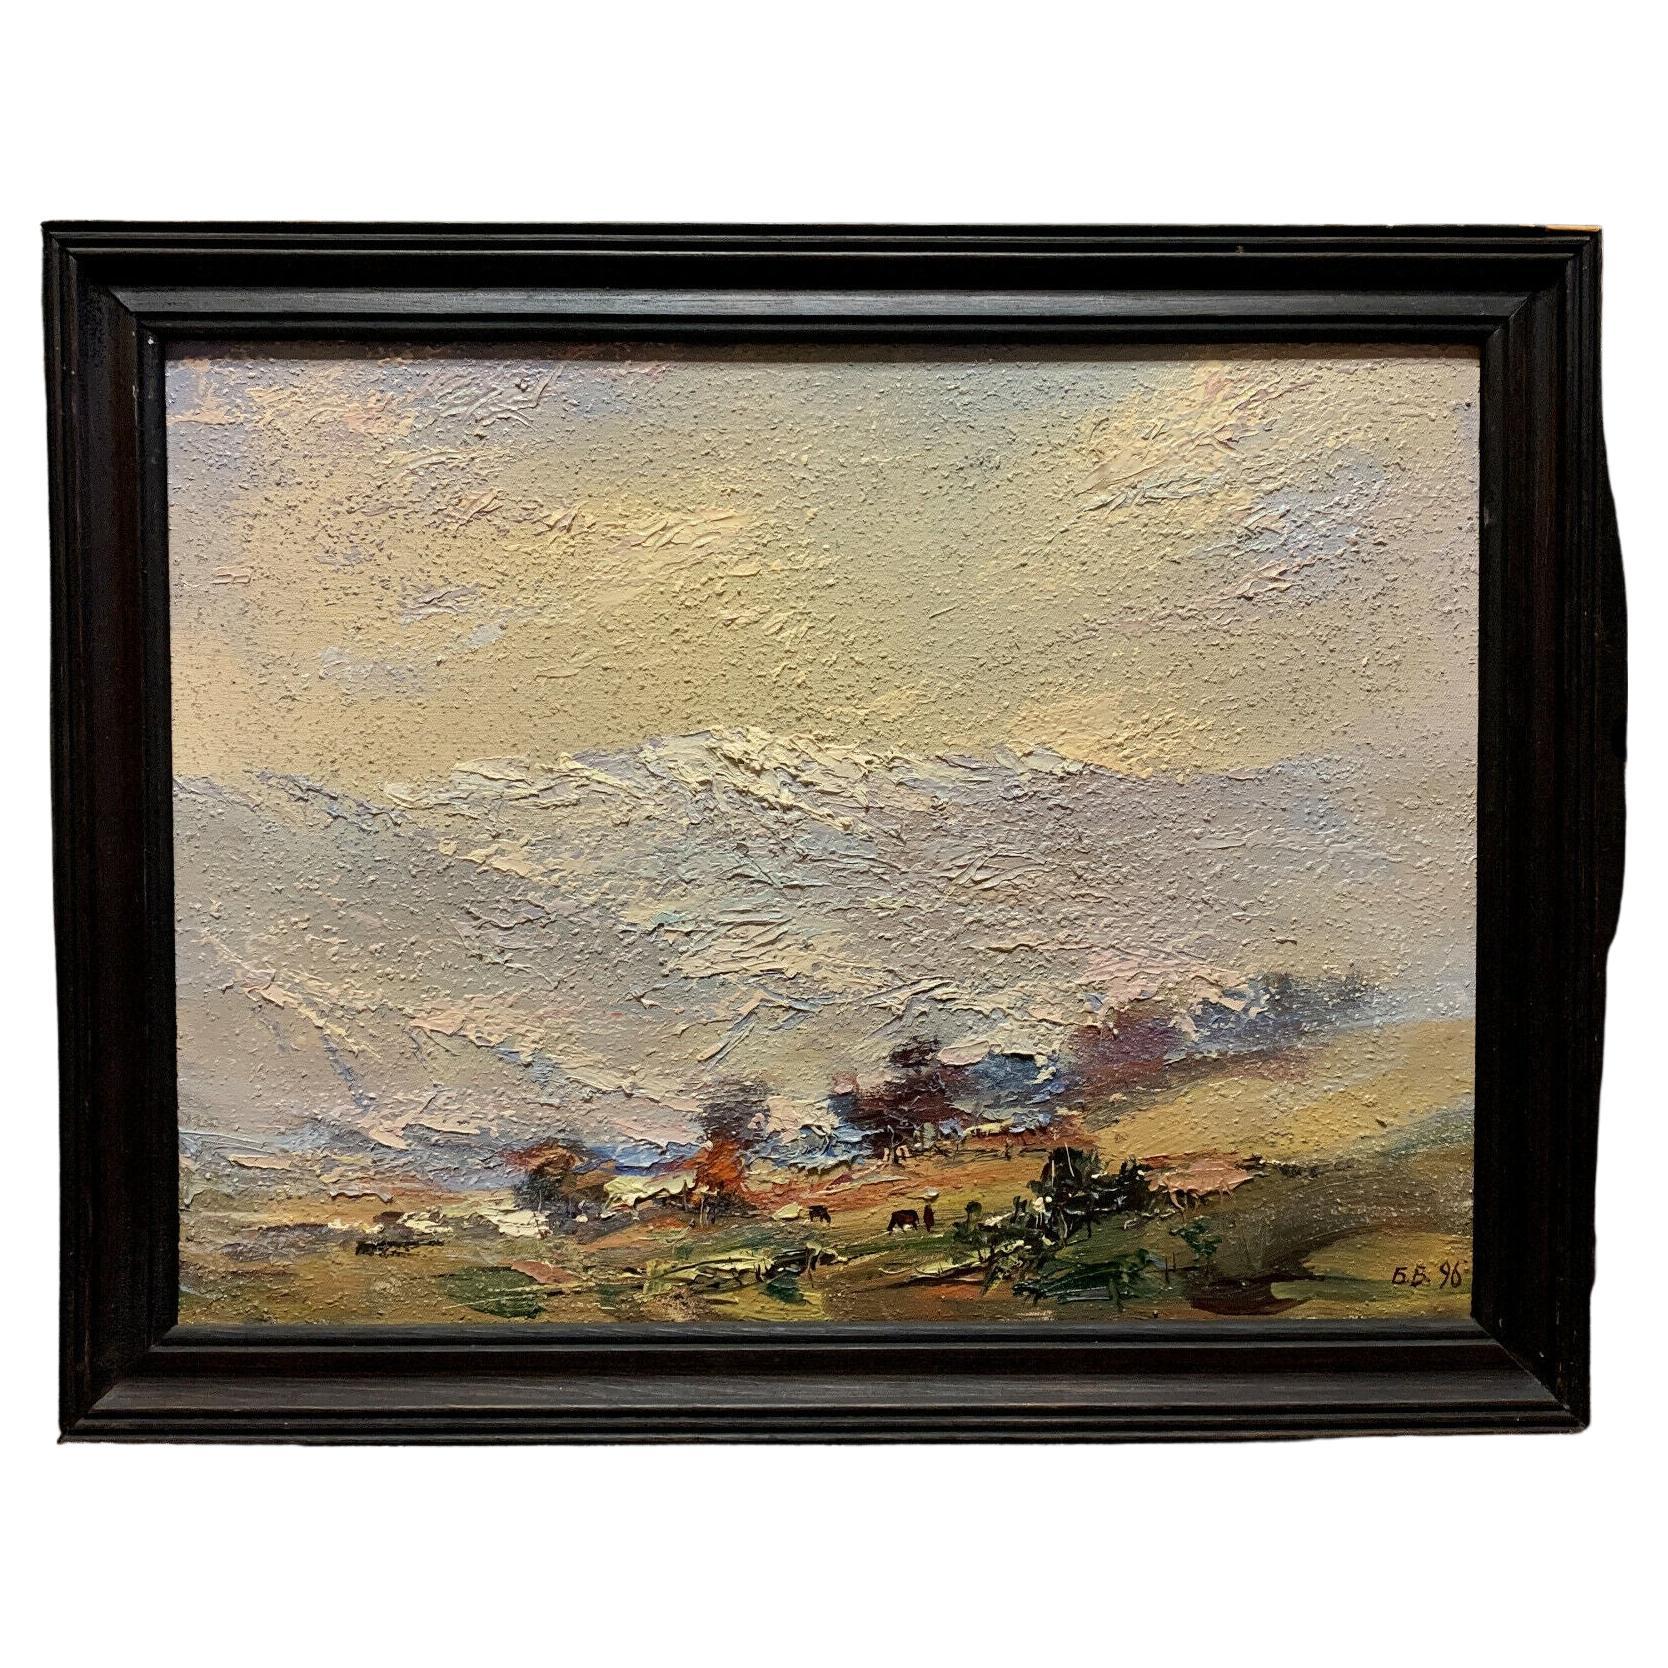 Eastern European School (1896) "Cows in Meadow at the Foot of the Mountain -1X17 For Sale